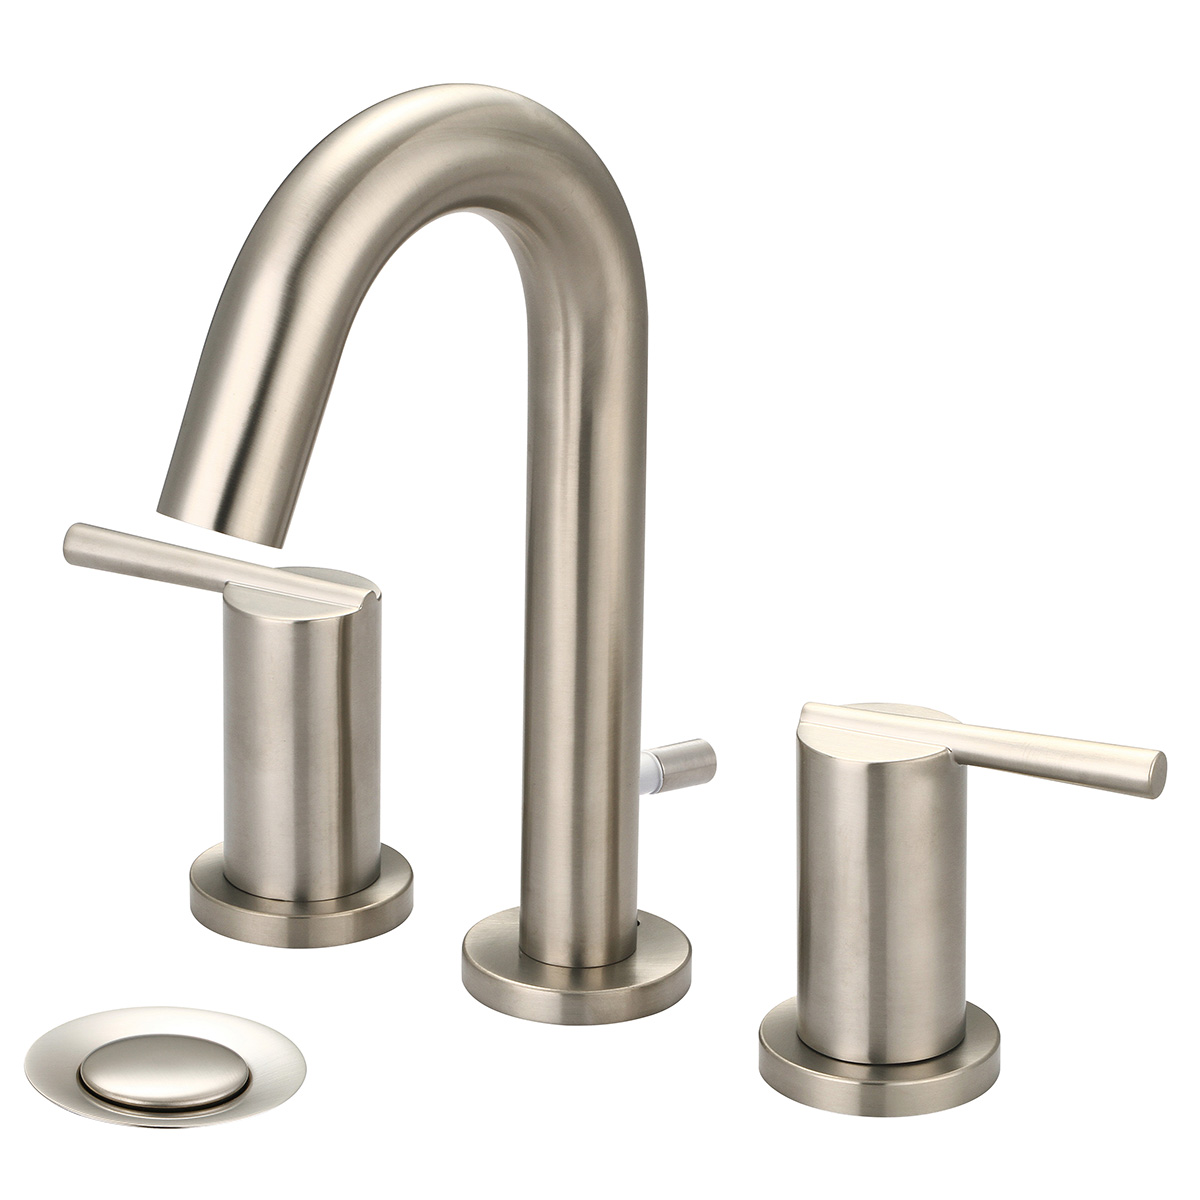 I2v L-7422-bn 4 In. Two Handle Lavatory Widespread Faucet - Brushed Nickel